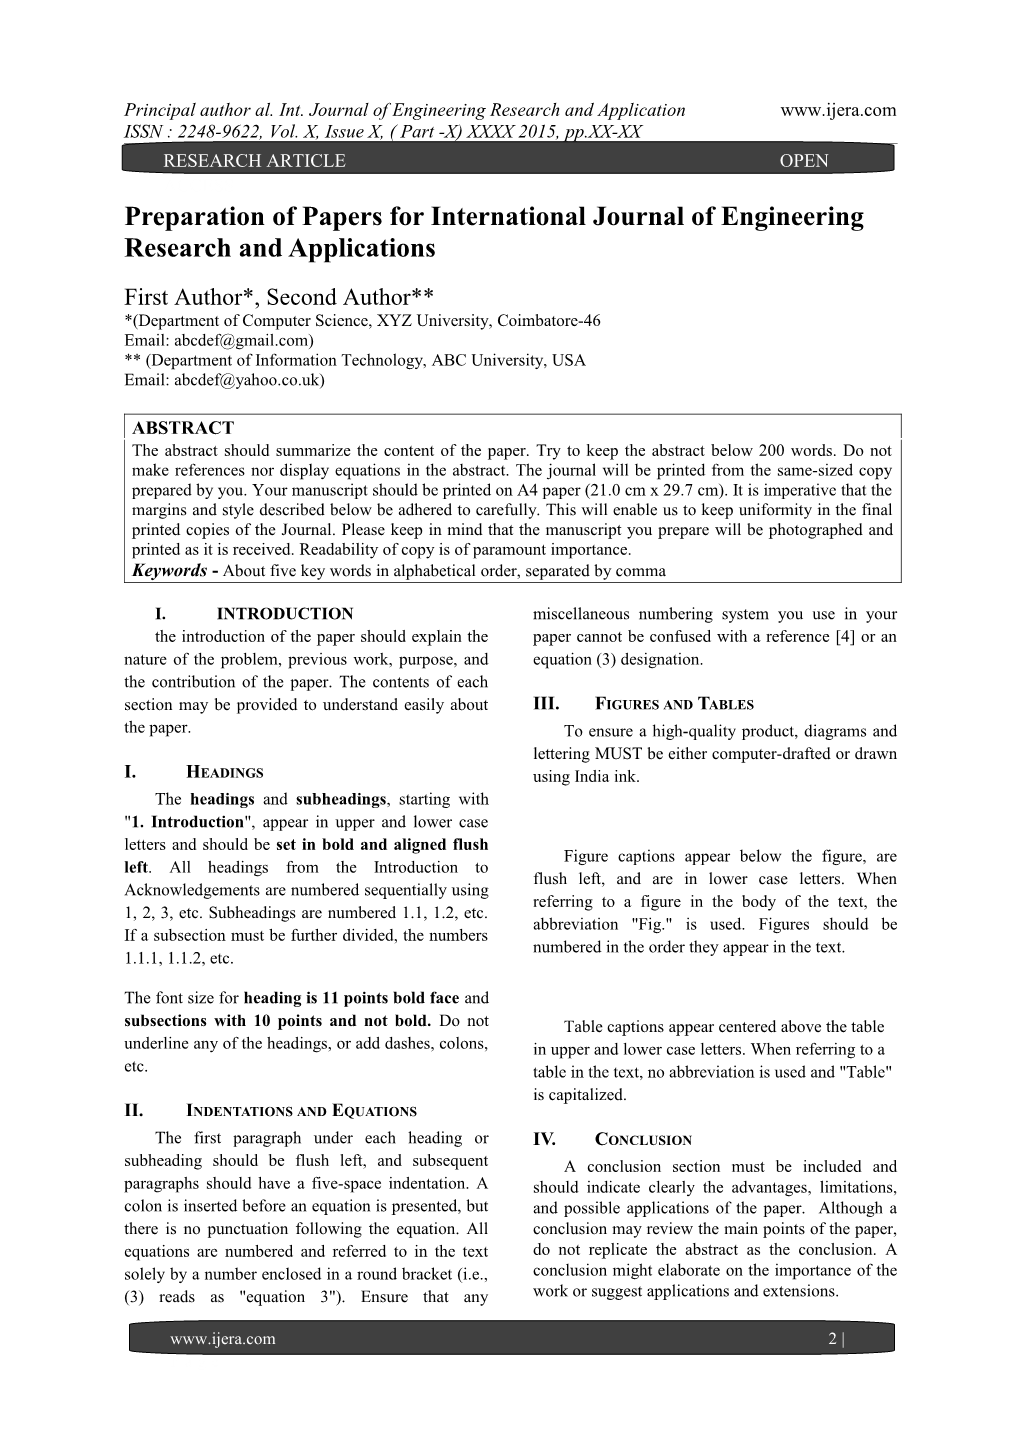 Principal Author Al. Int. Journal of Engineering Research and Application